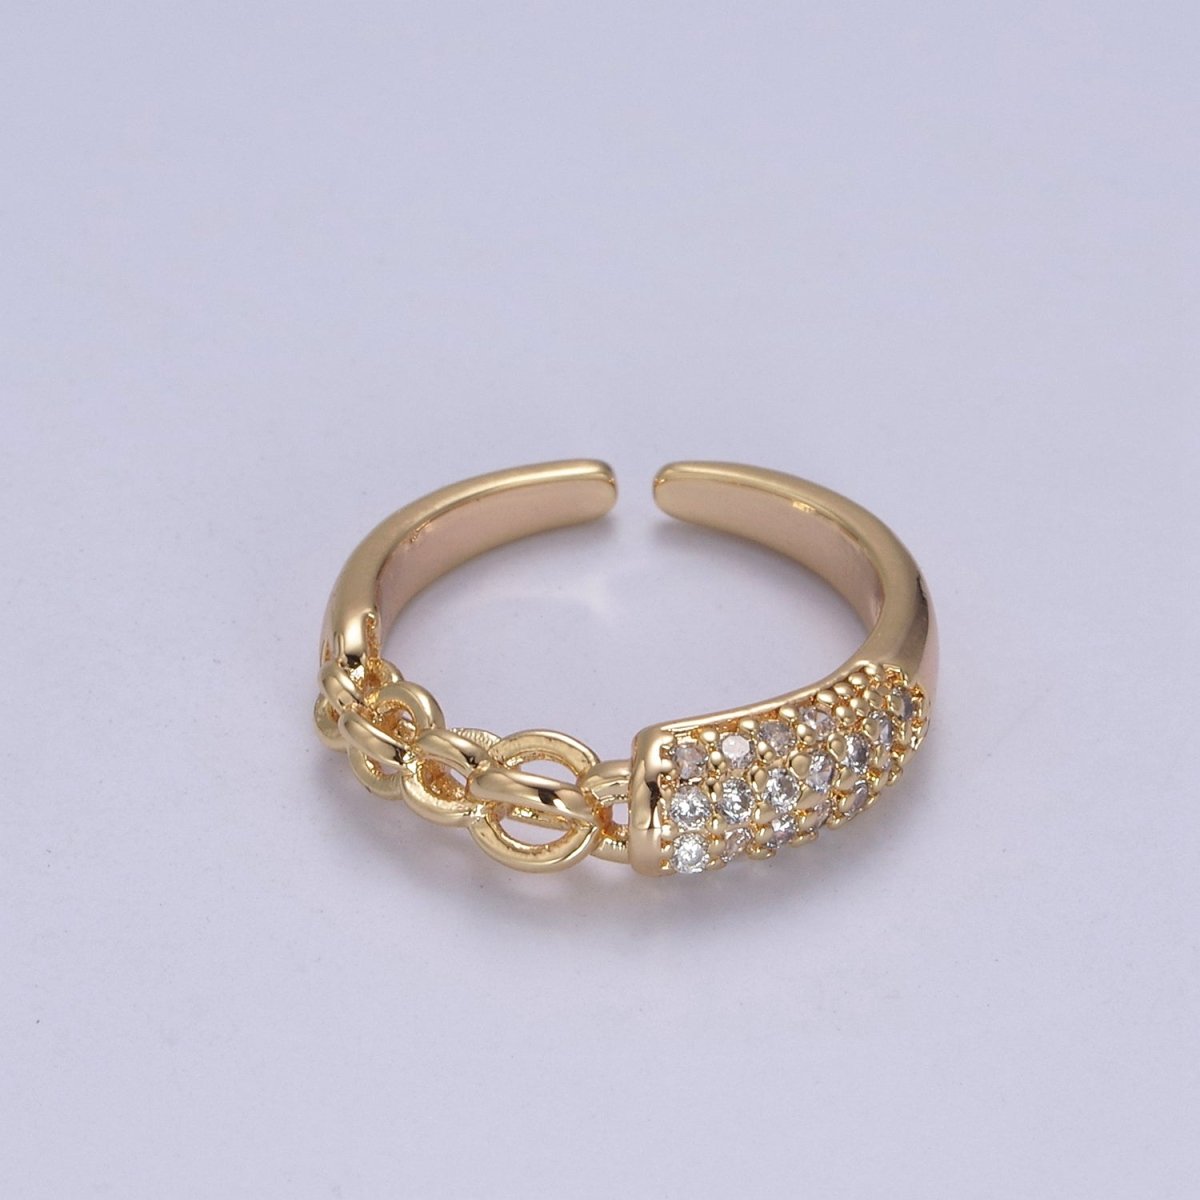 Mix Cz Ring With Chain Link Design Inspired Stackable Open Adjustable Ring U-311 - DLUXCA